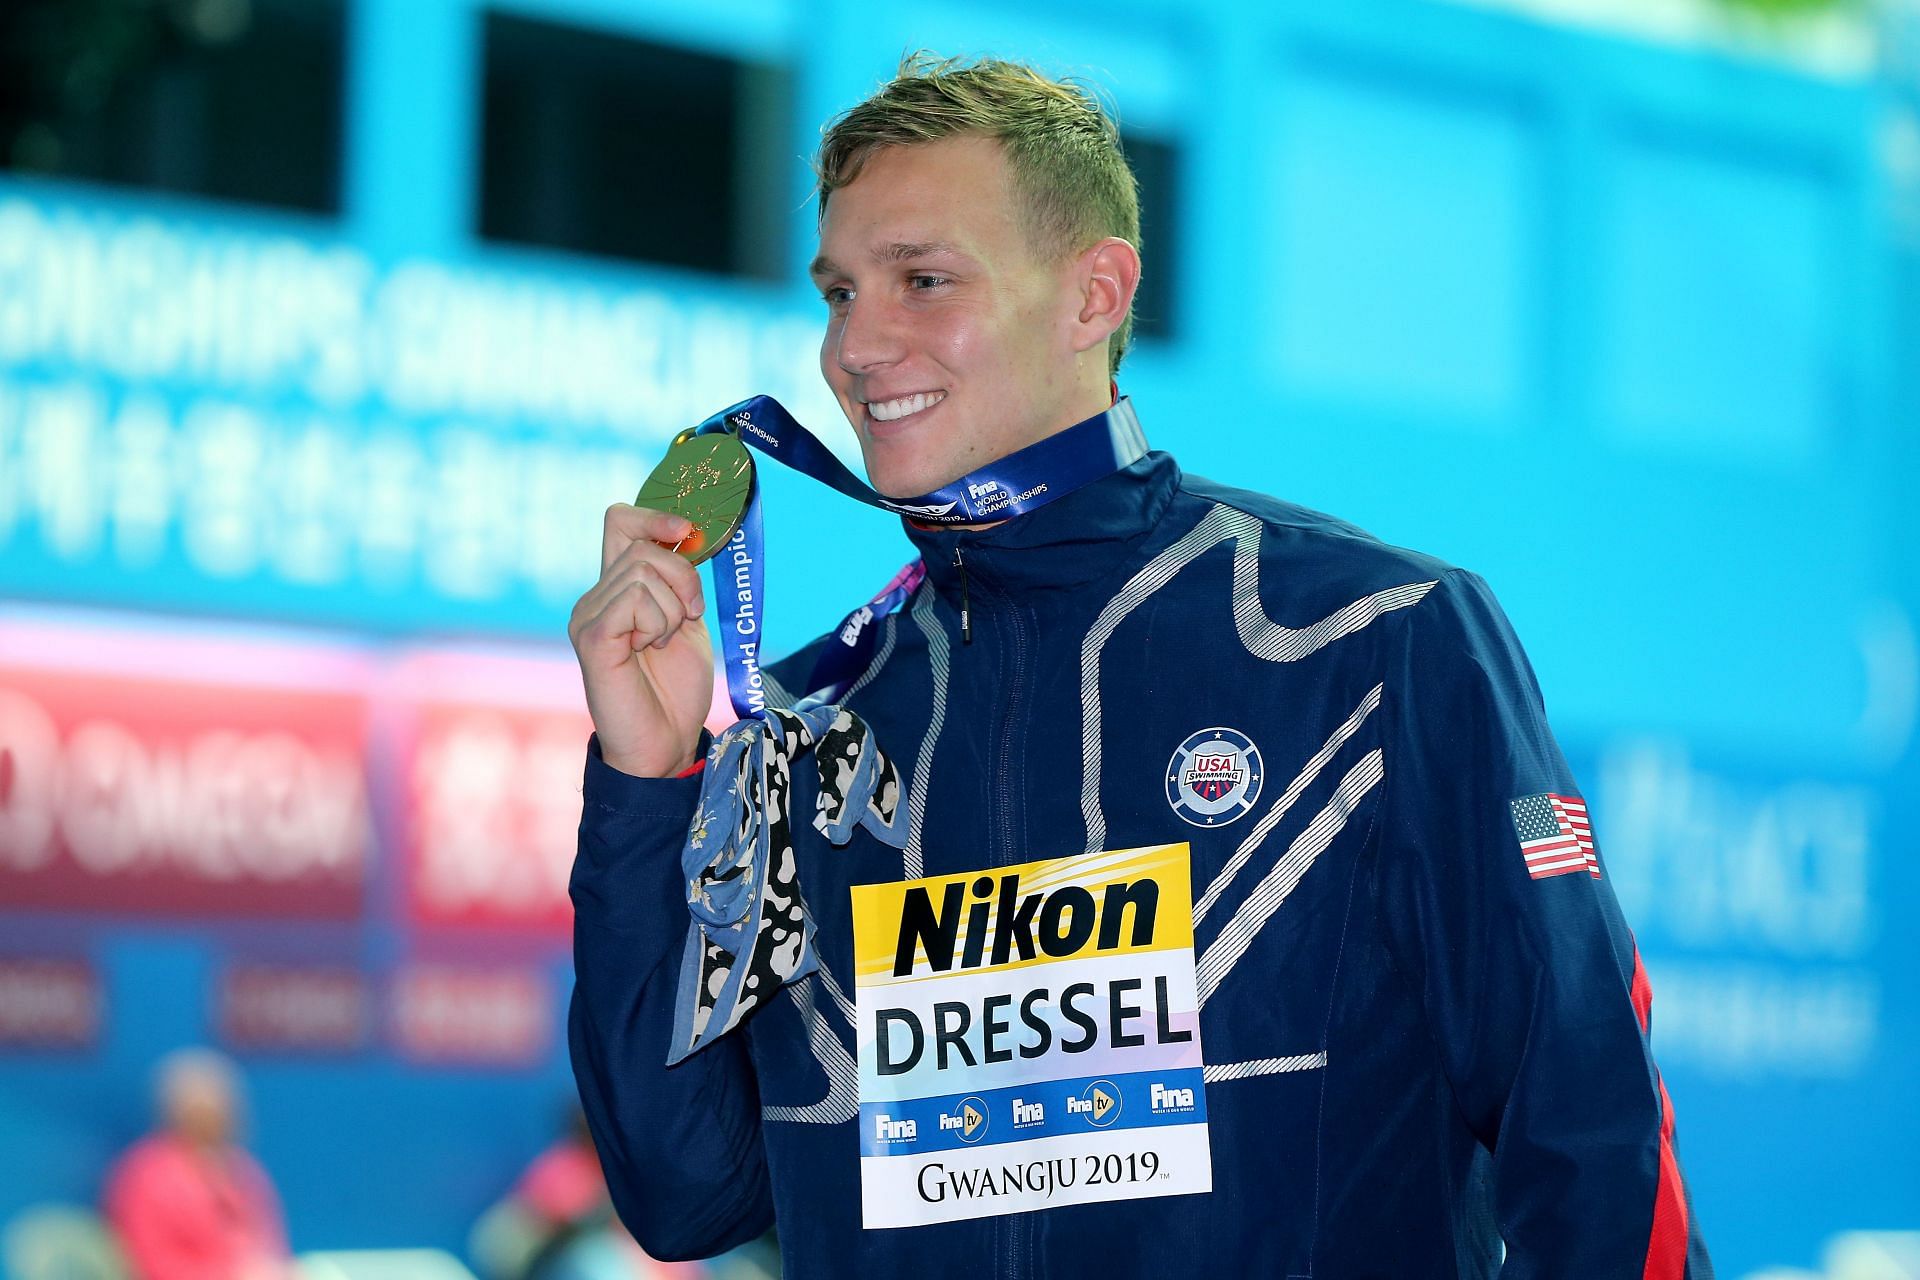 Dressel poses with his gold medal during the 2019 FINA World Championships